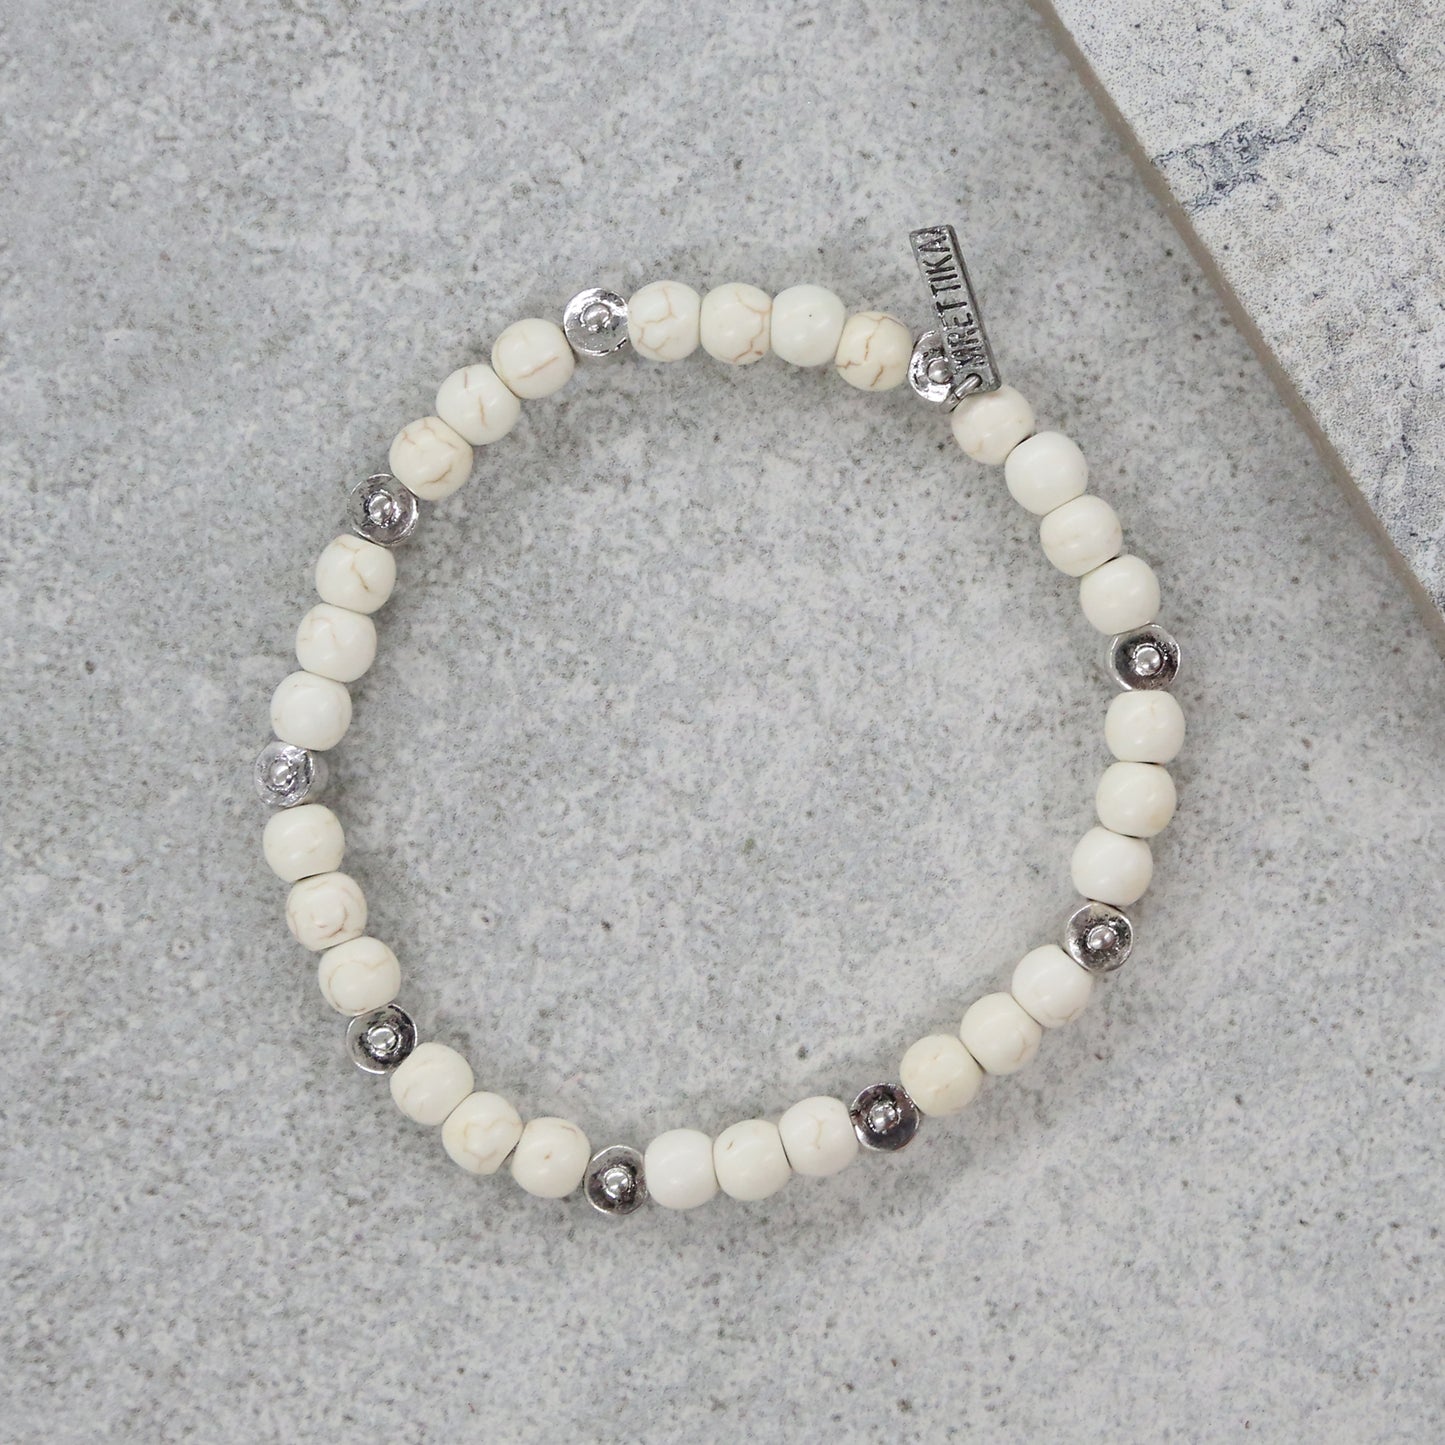 Weekend Warrior Bracelet in White and Silver Ox